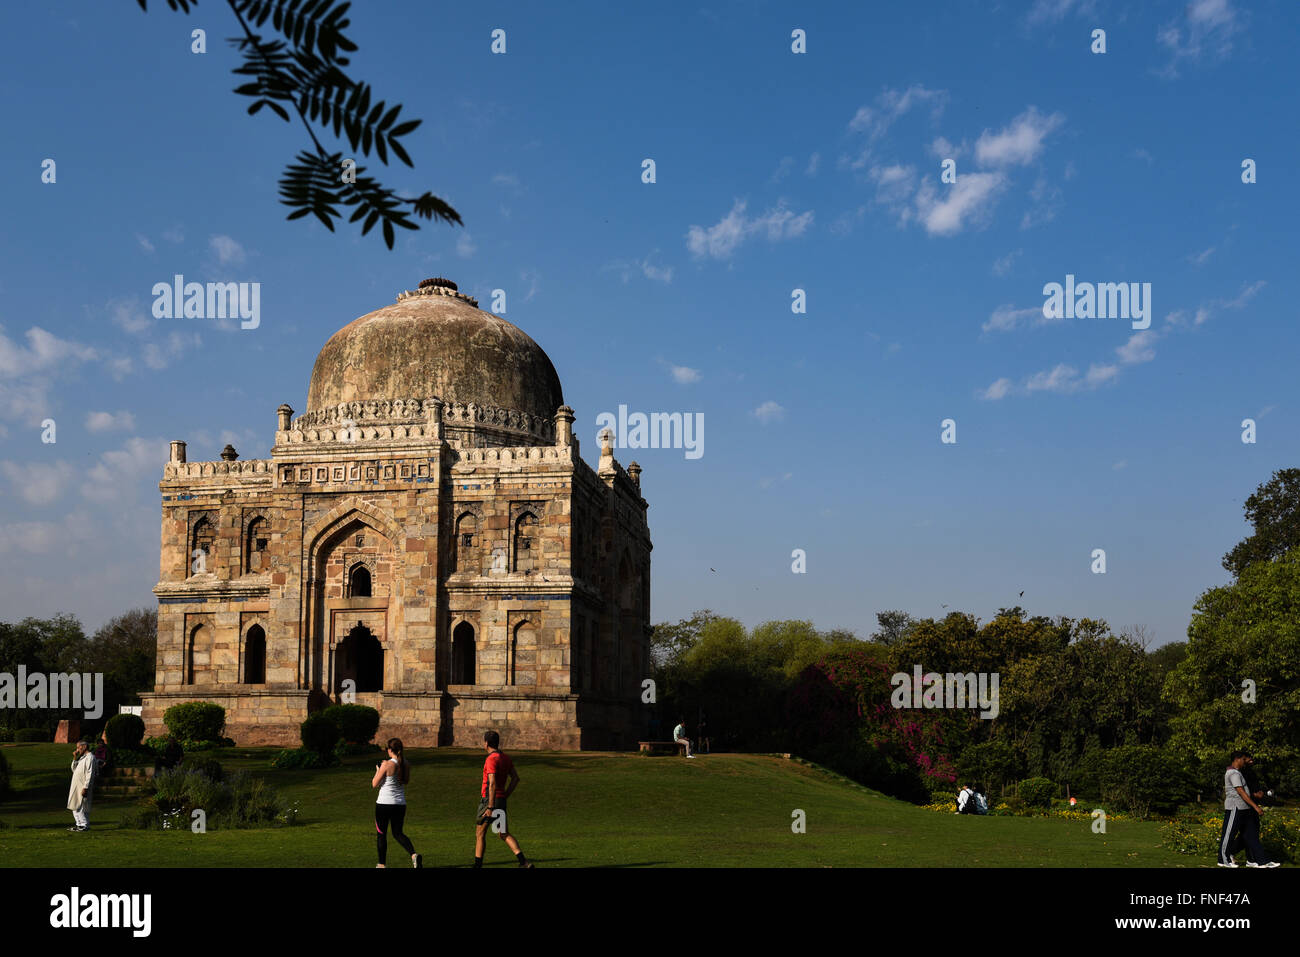 Shisha Gumbad is a tomb in New Delhi from the last lineage of the Lodhi Dynasty constructed between 1489 and 1517 CE. Stock Photo